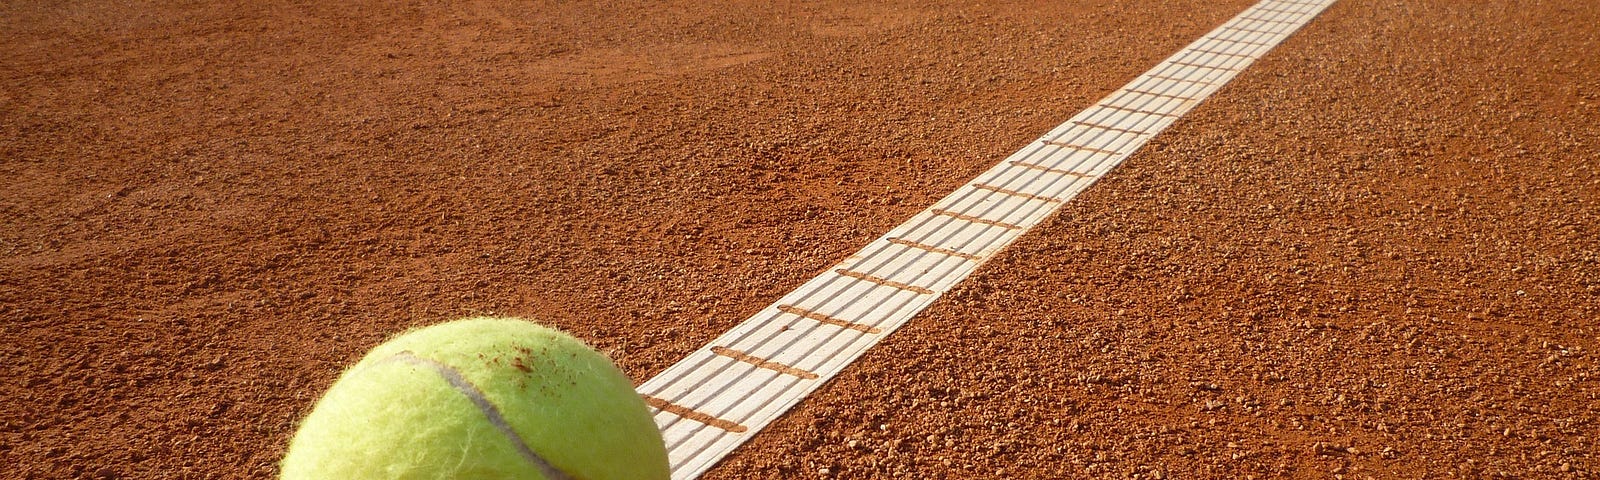 Brown ground of a tennis court with a white boundary line. A yellow tennis ball sits on the white boundary line.